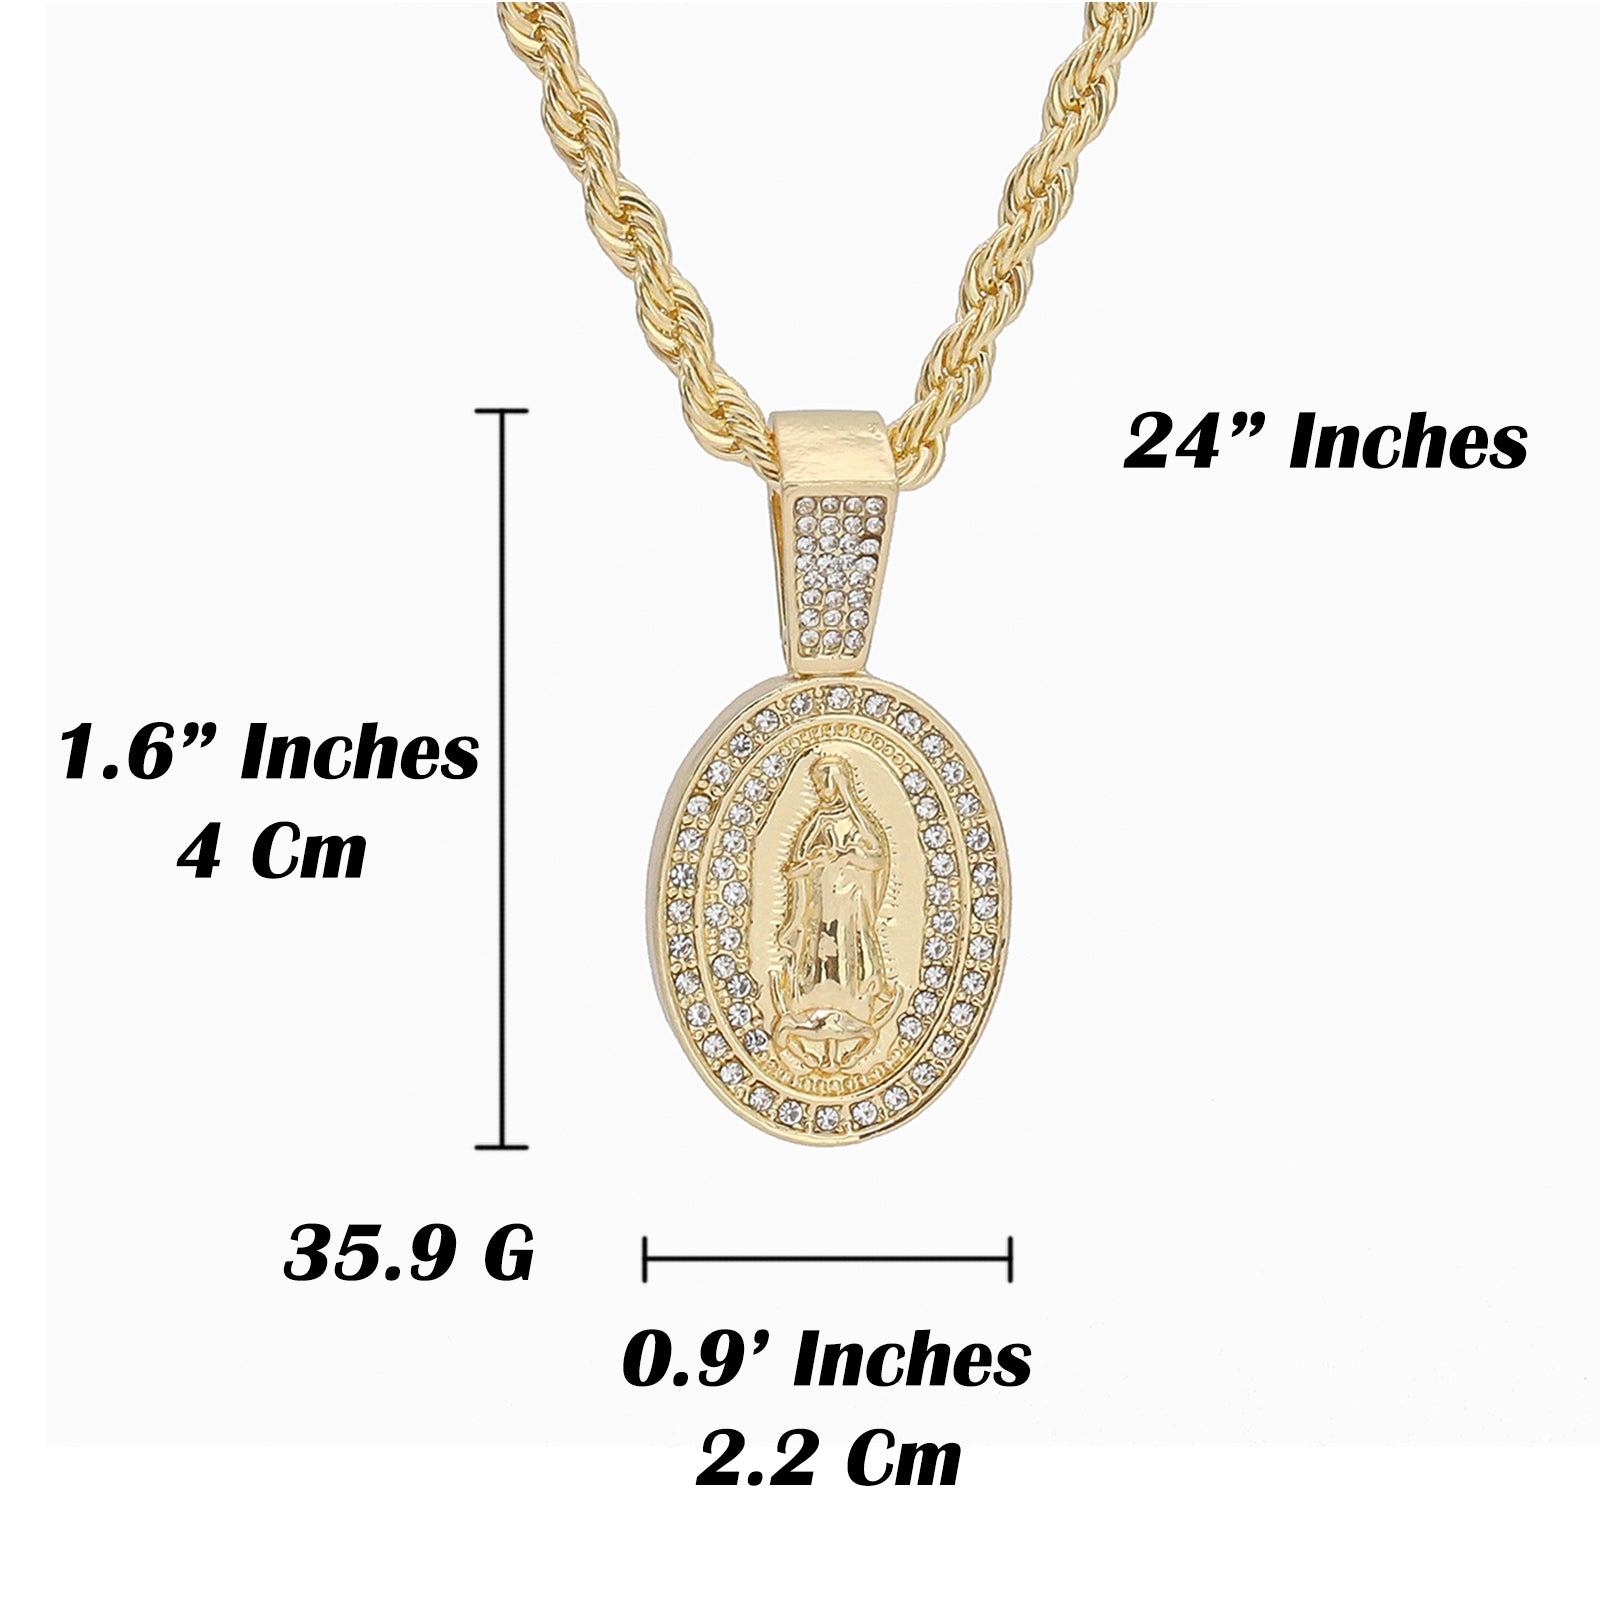 Small Iced Guadalupe Oval Pendant Rope Chain Men's Hip Hop 18k Cz Jewelry Necklace Choker